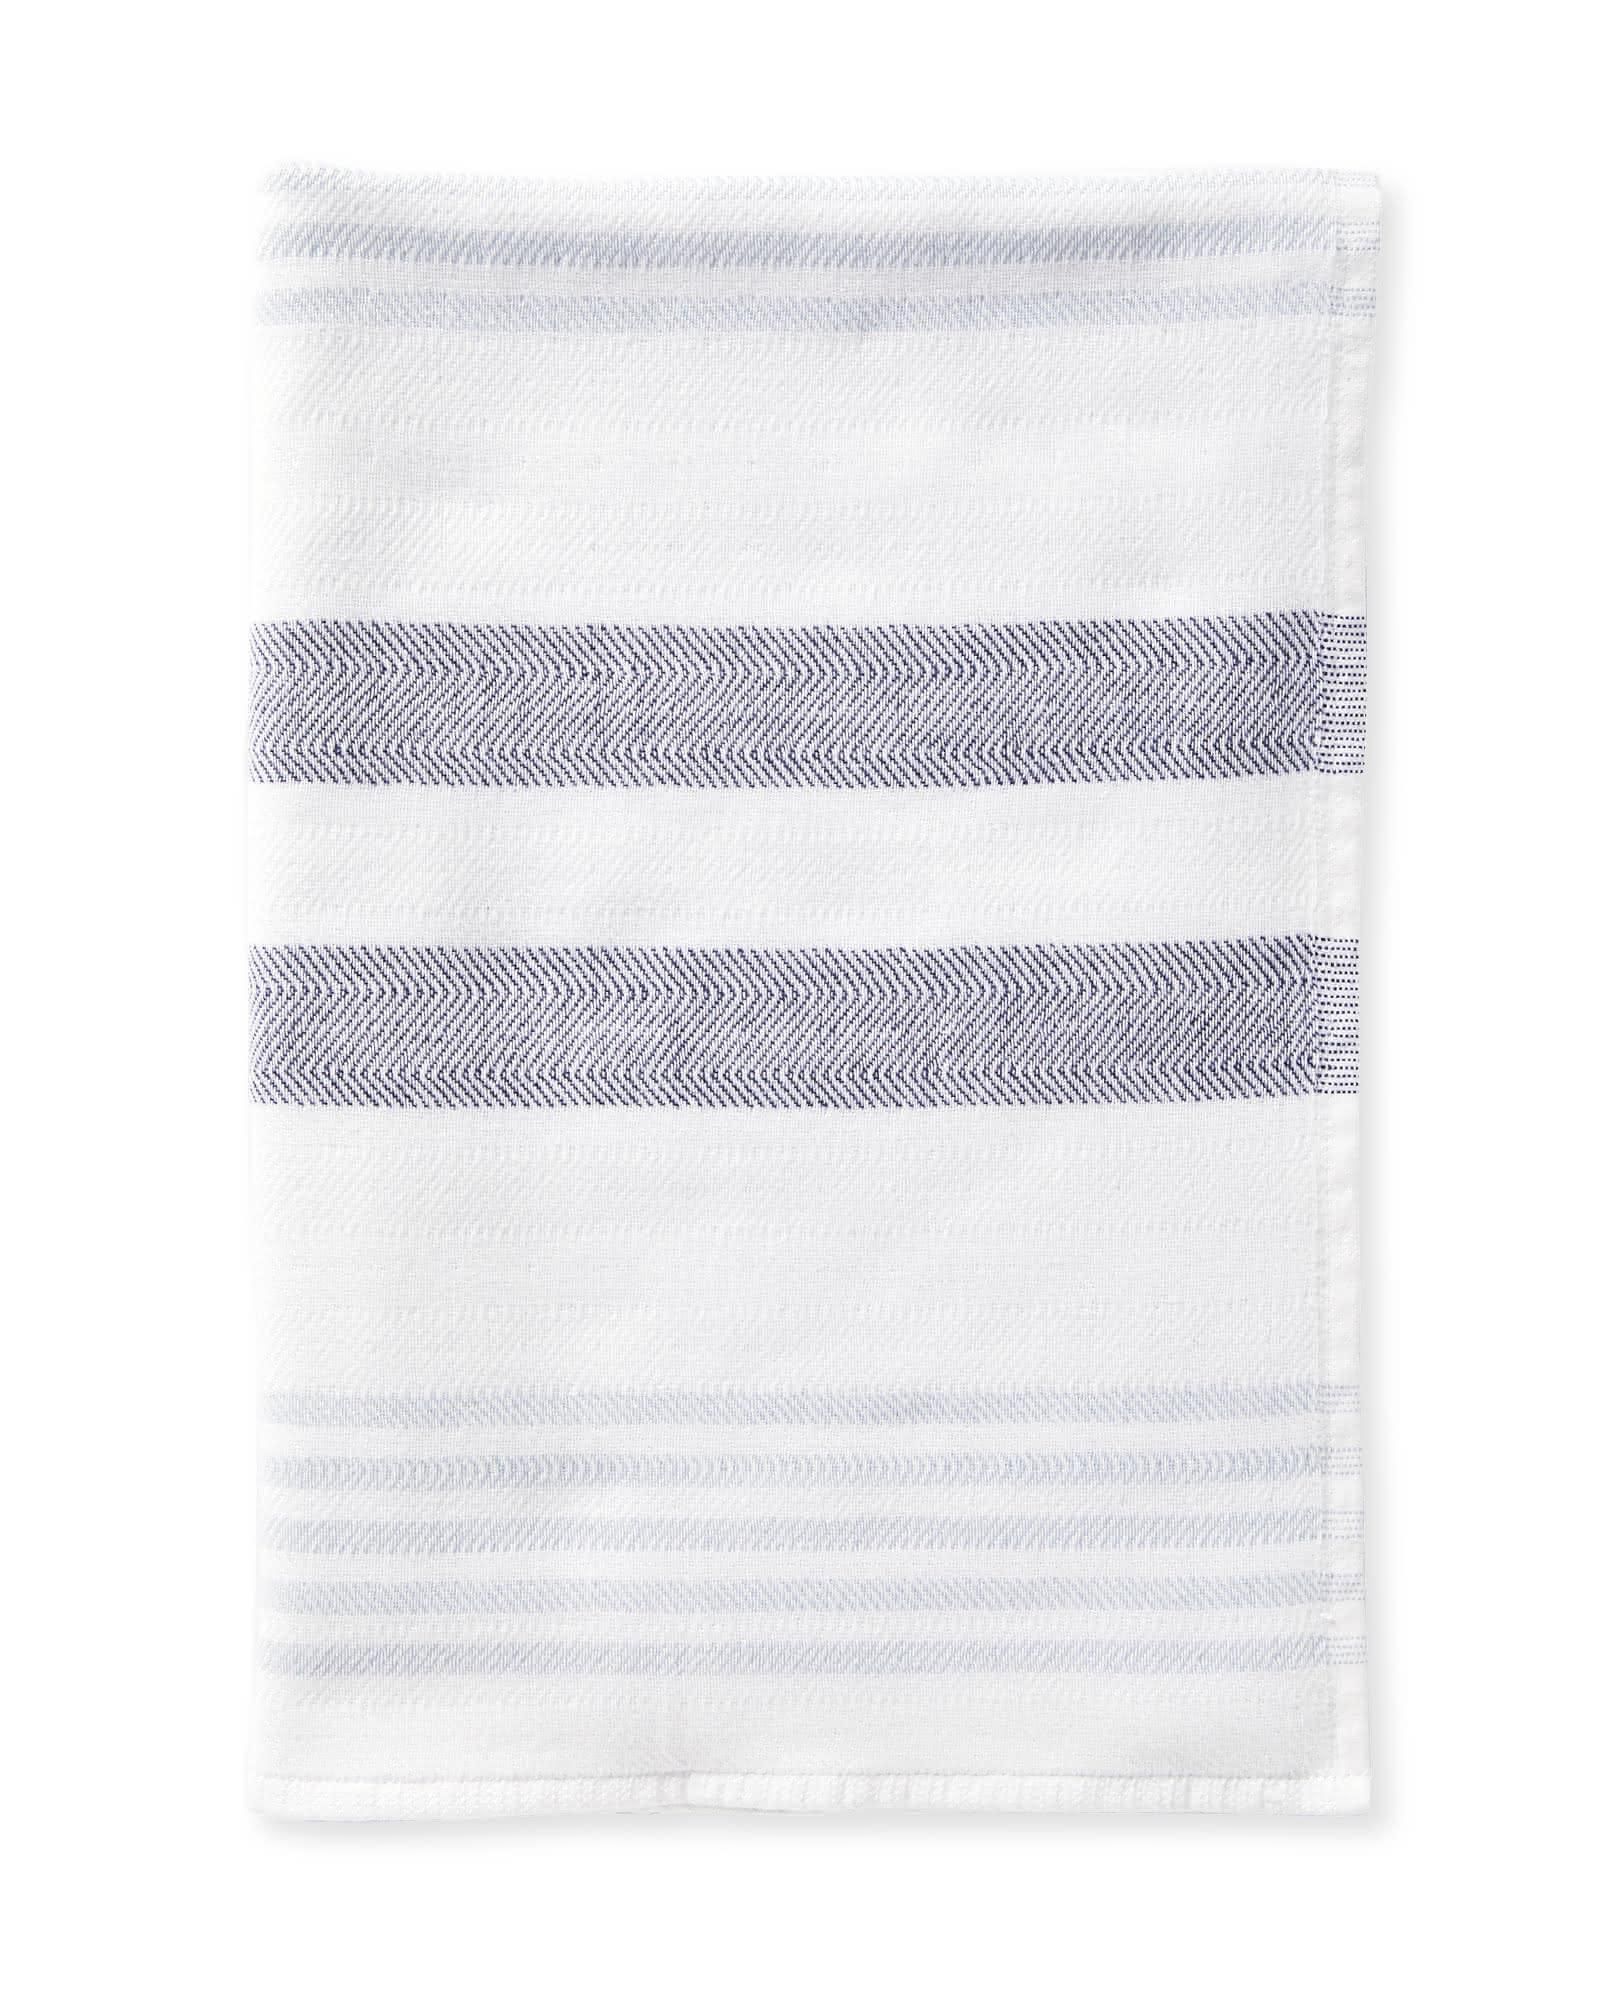 Fouta Turkish Cotton Bath Collection | Serena and Lily